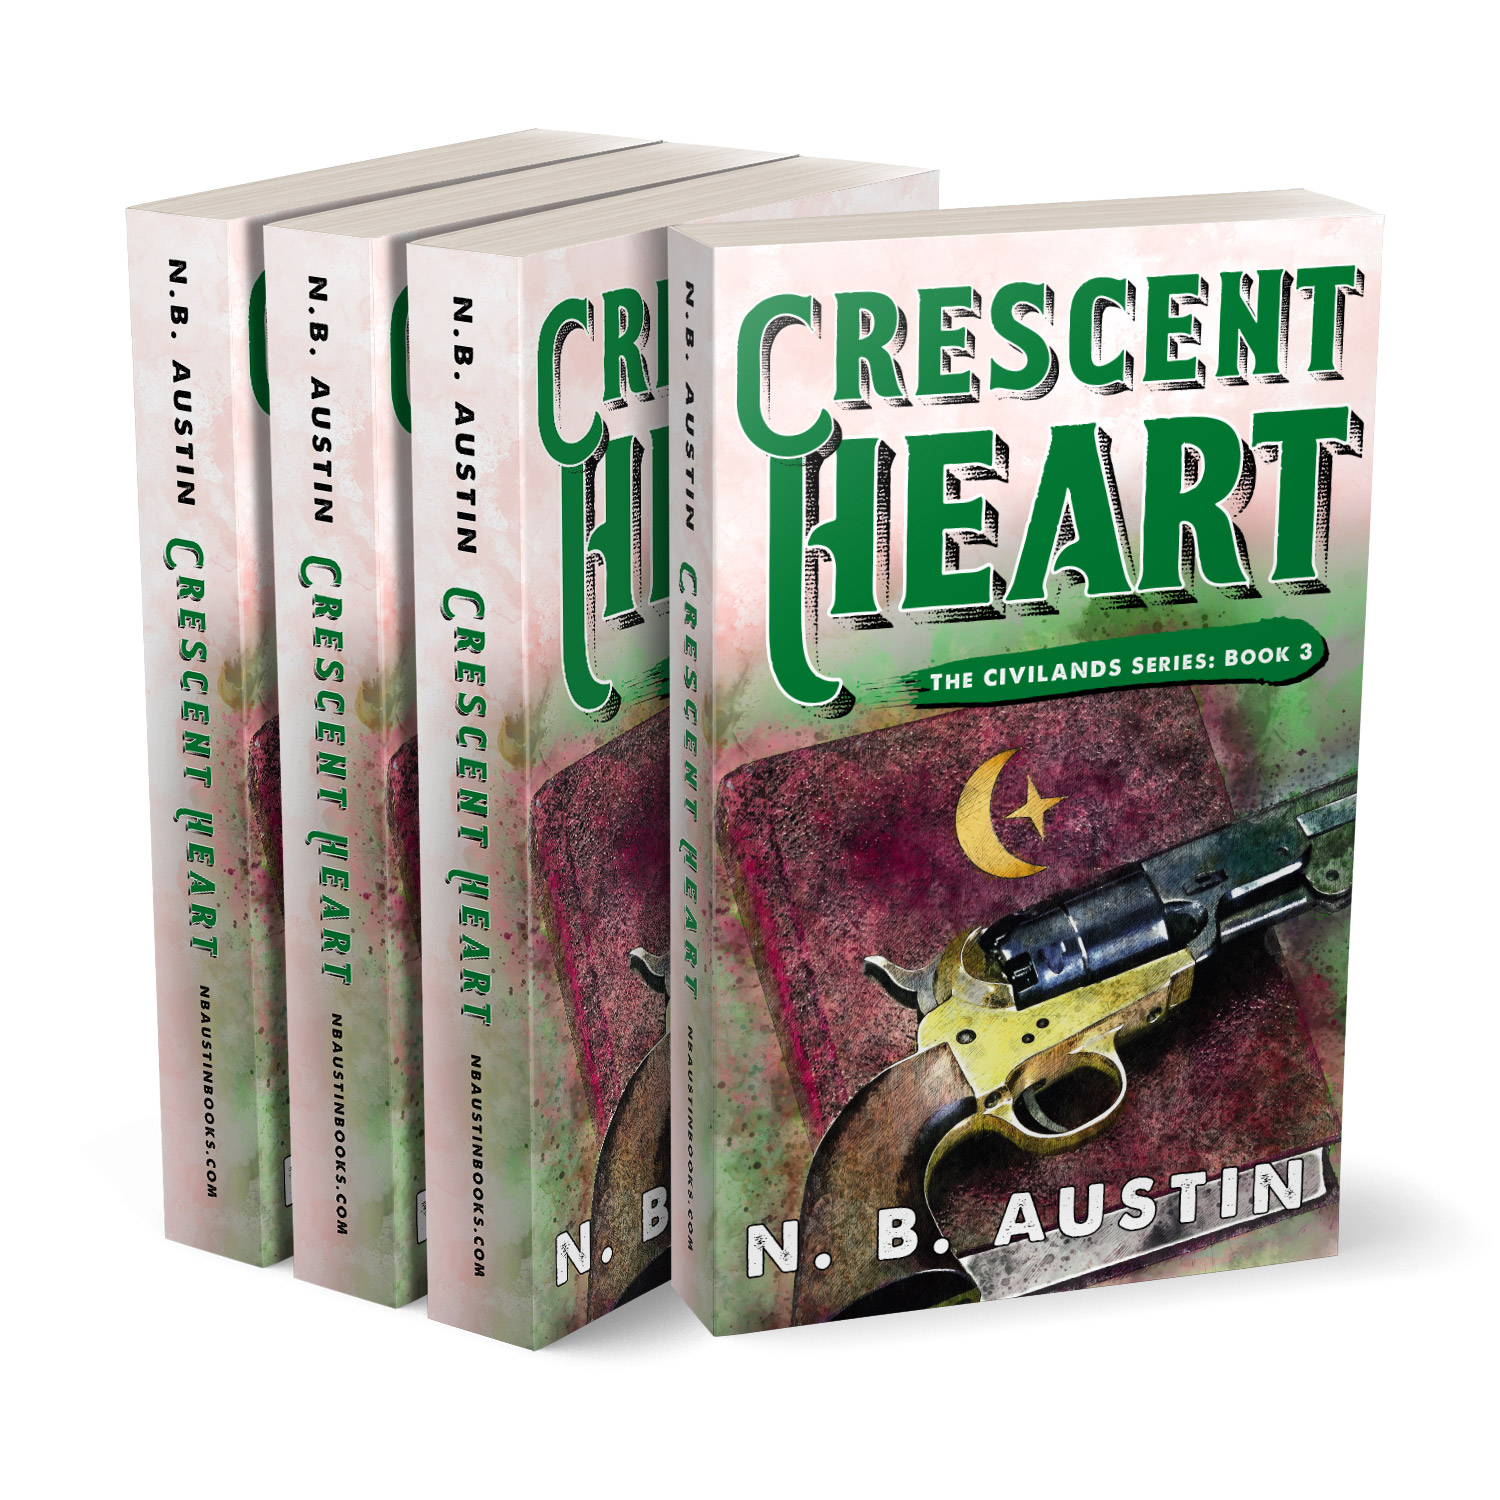 'Crescent Heart' is a sweeping alt-history Western fantasy novel, by N B Austin. The book cover and interior were designed by Mark Thomas, of coverness.com. To find out more about my book design services, please visit www.coverness.com.